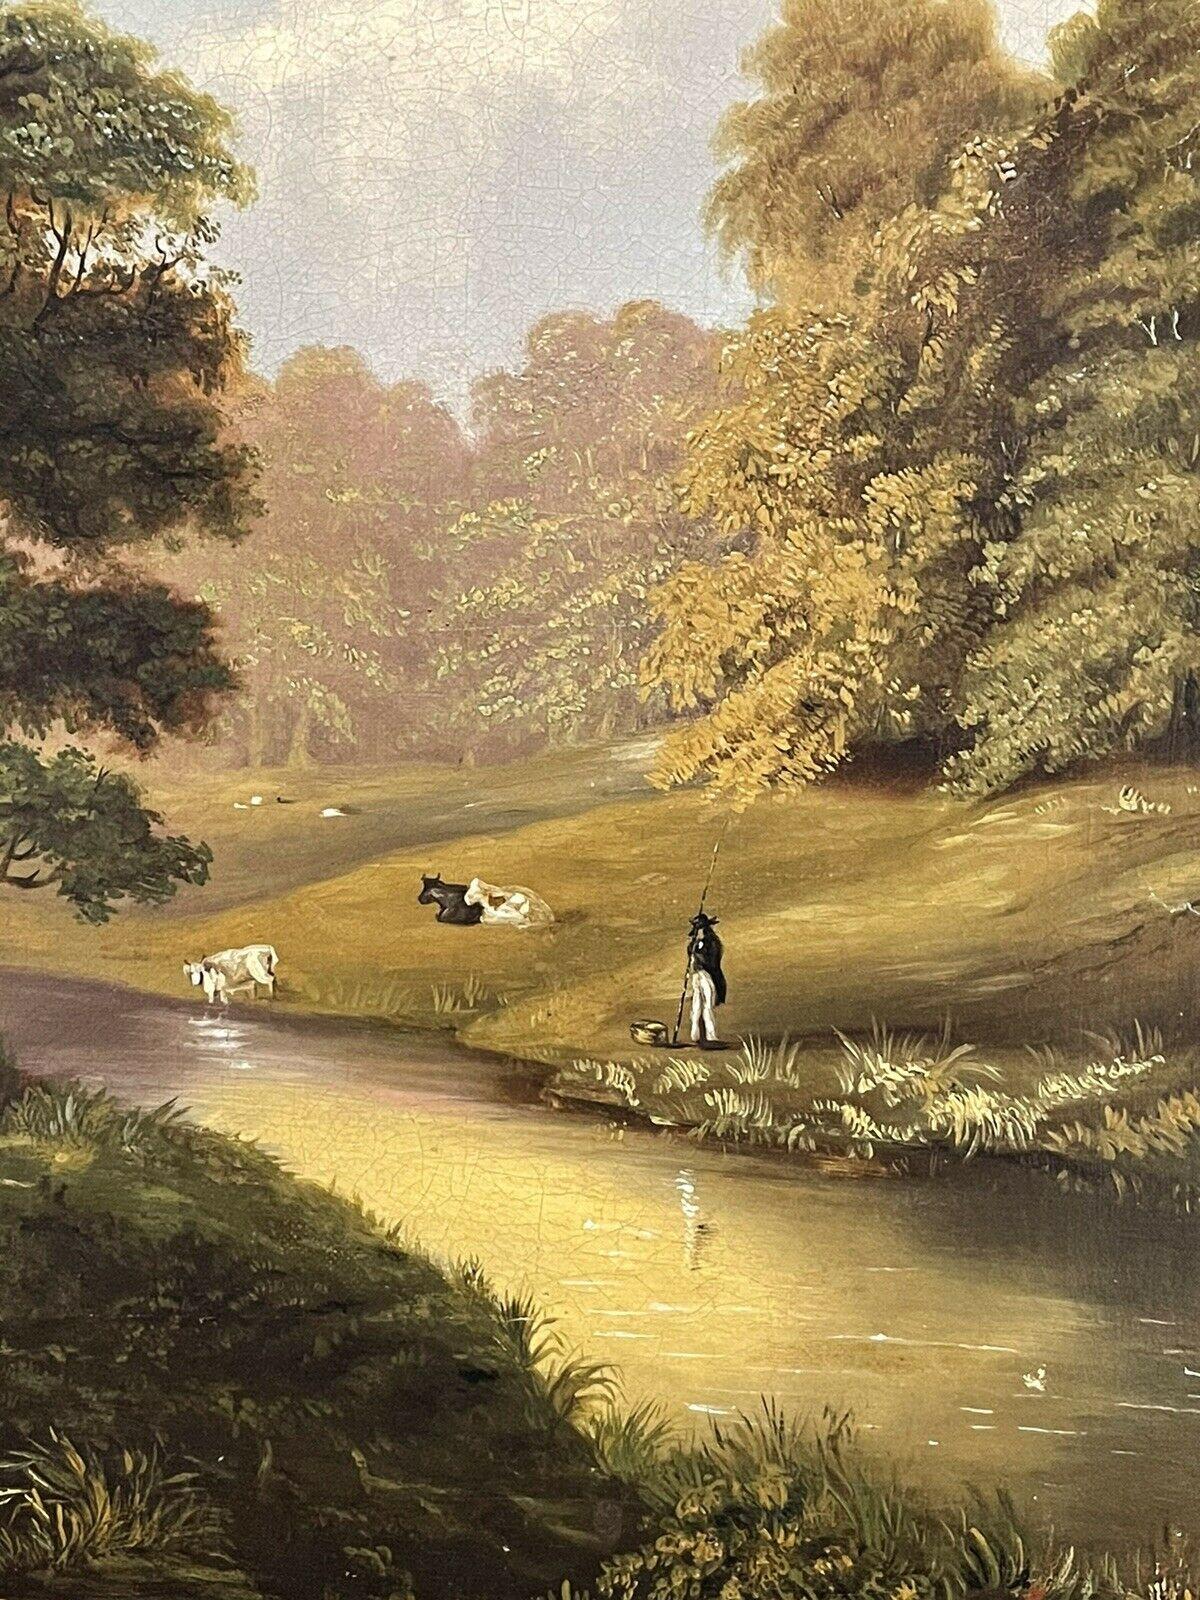 FINE 1850'S ENGLISH OIL - GENTLEMAN ANGLER ON RIVER BANK PASTORAL LANDSCAPE - Victorian Painting by Unknown